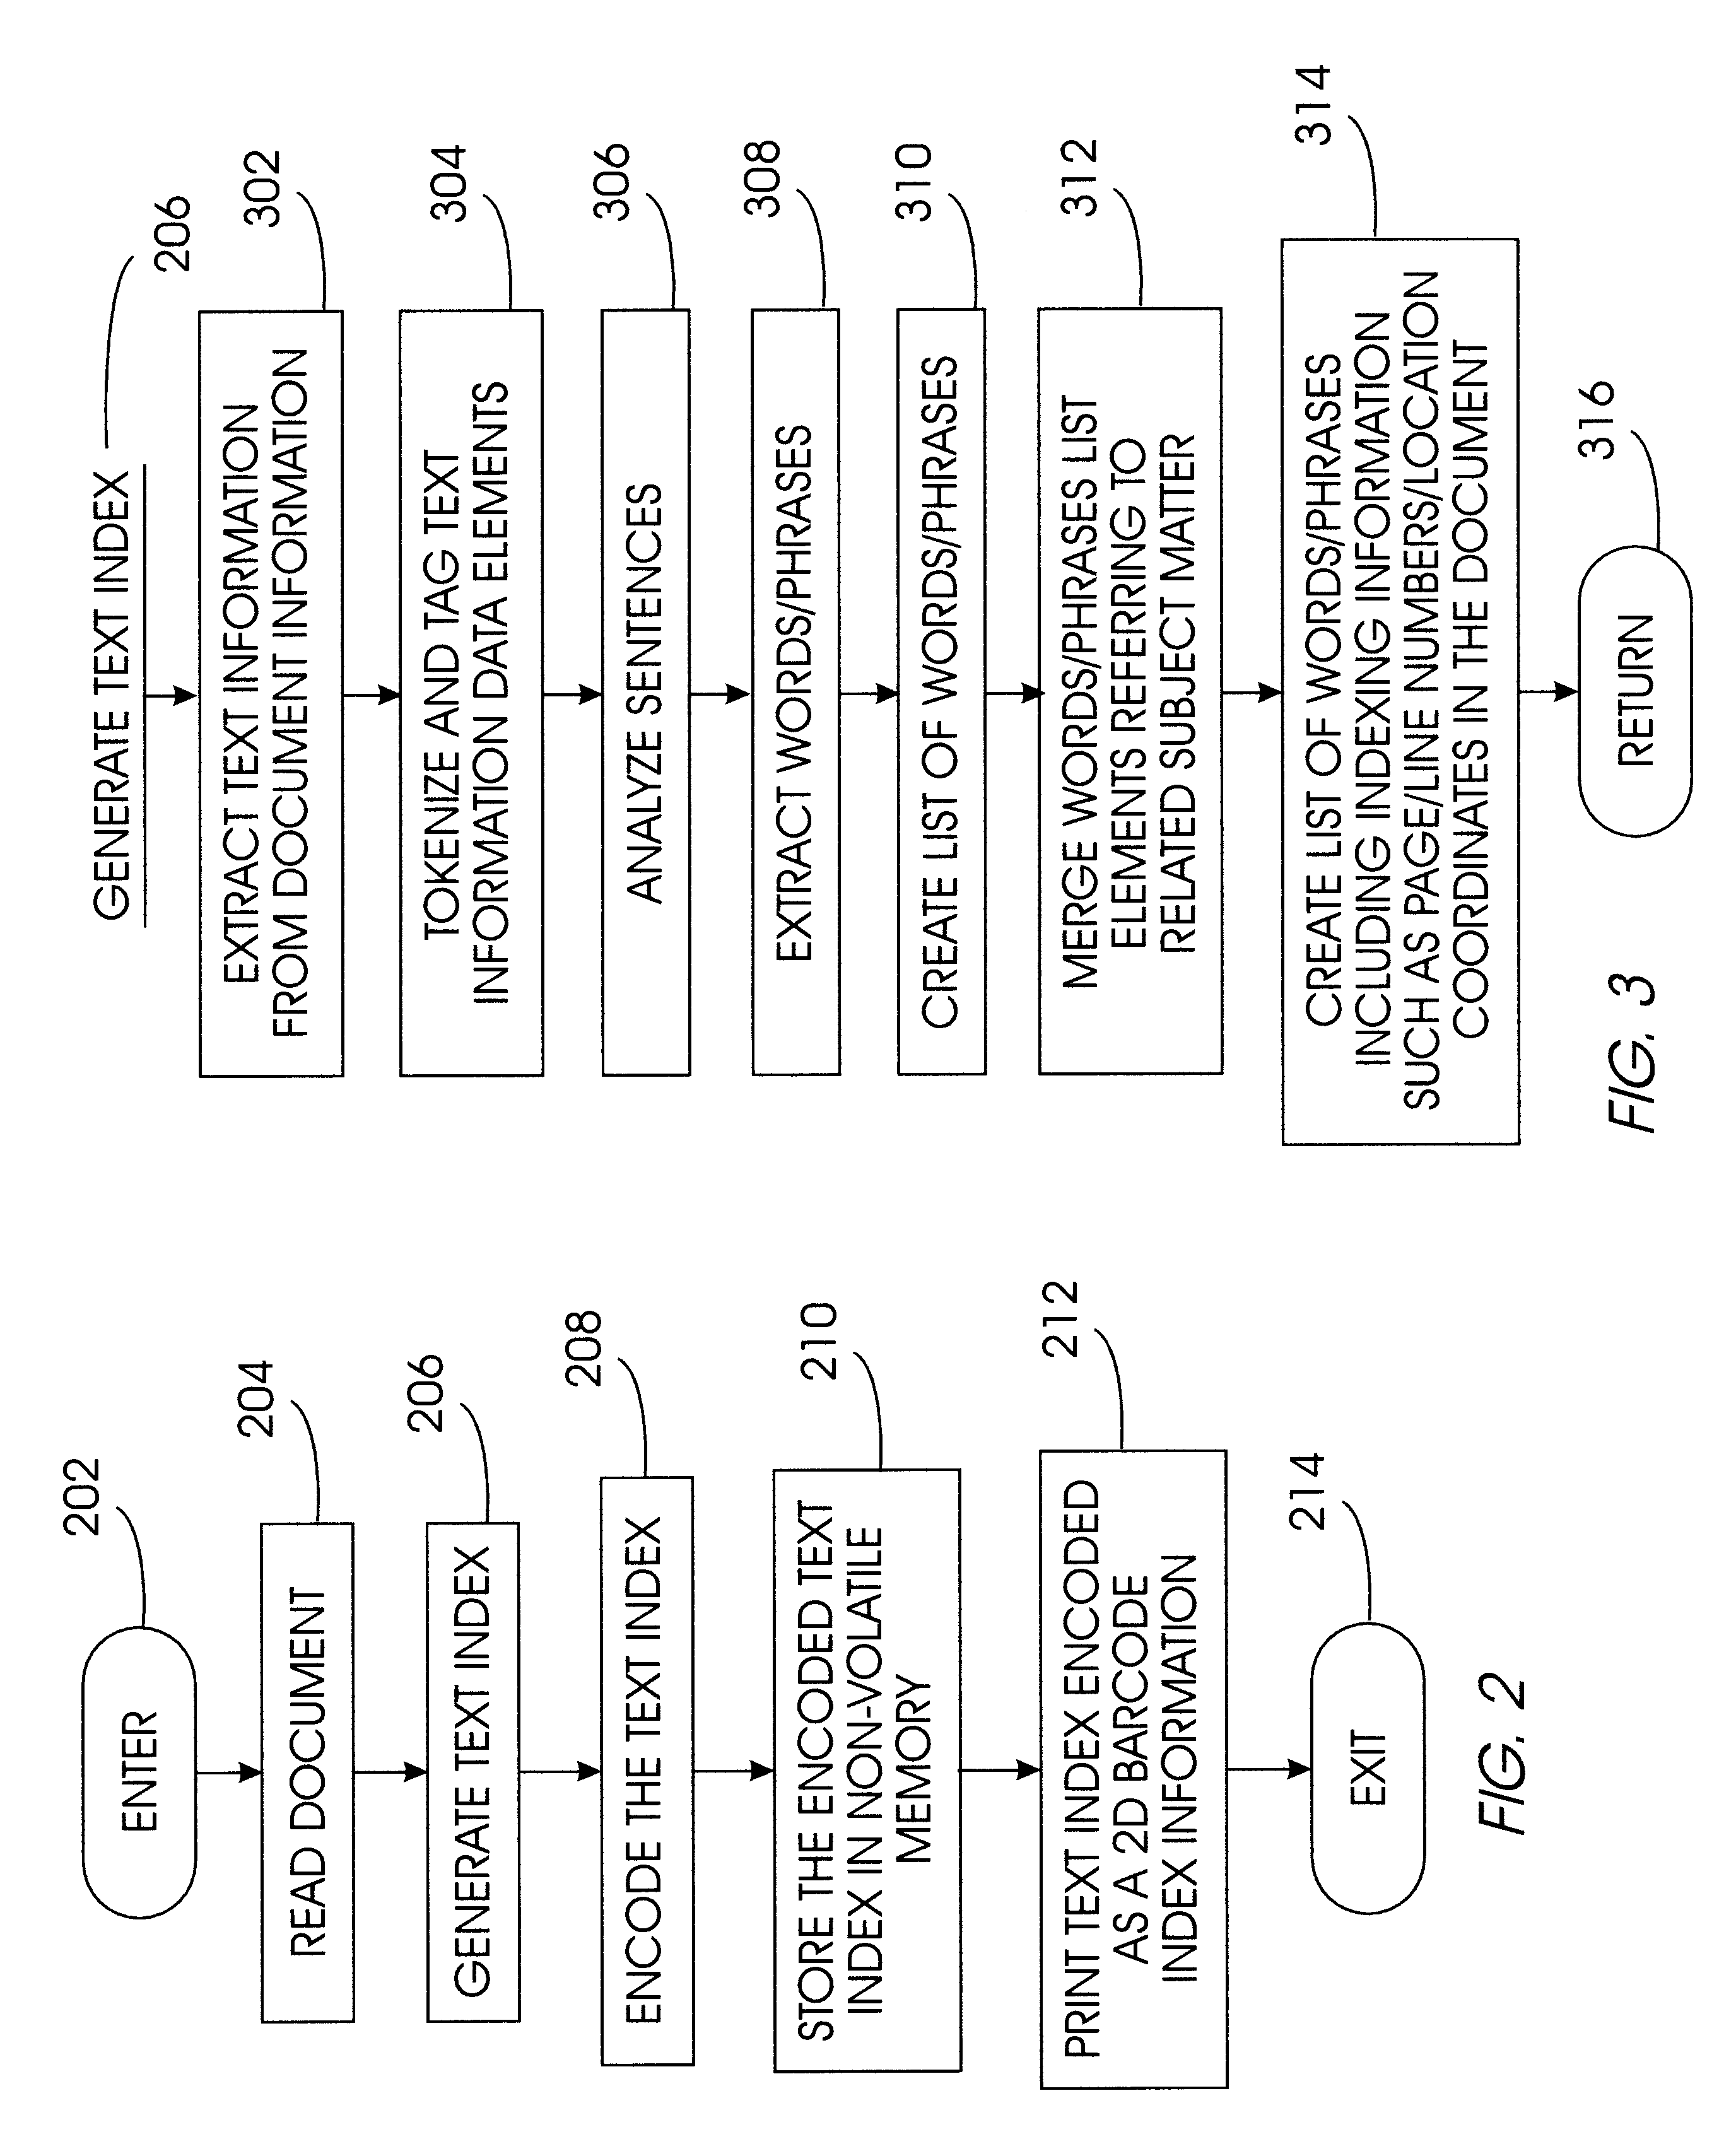 Method and apparatus for indexing and searching content in hardcopy documents